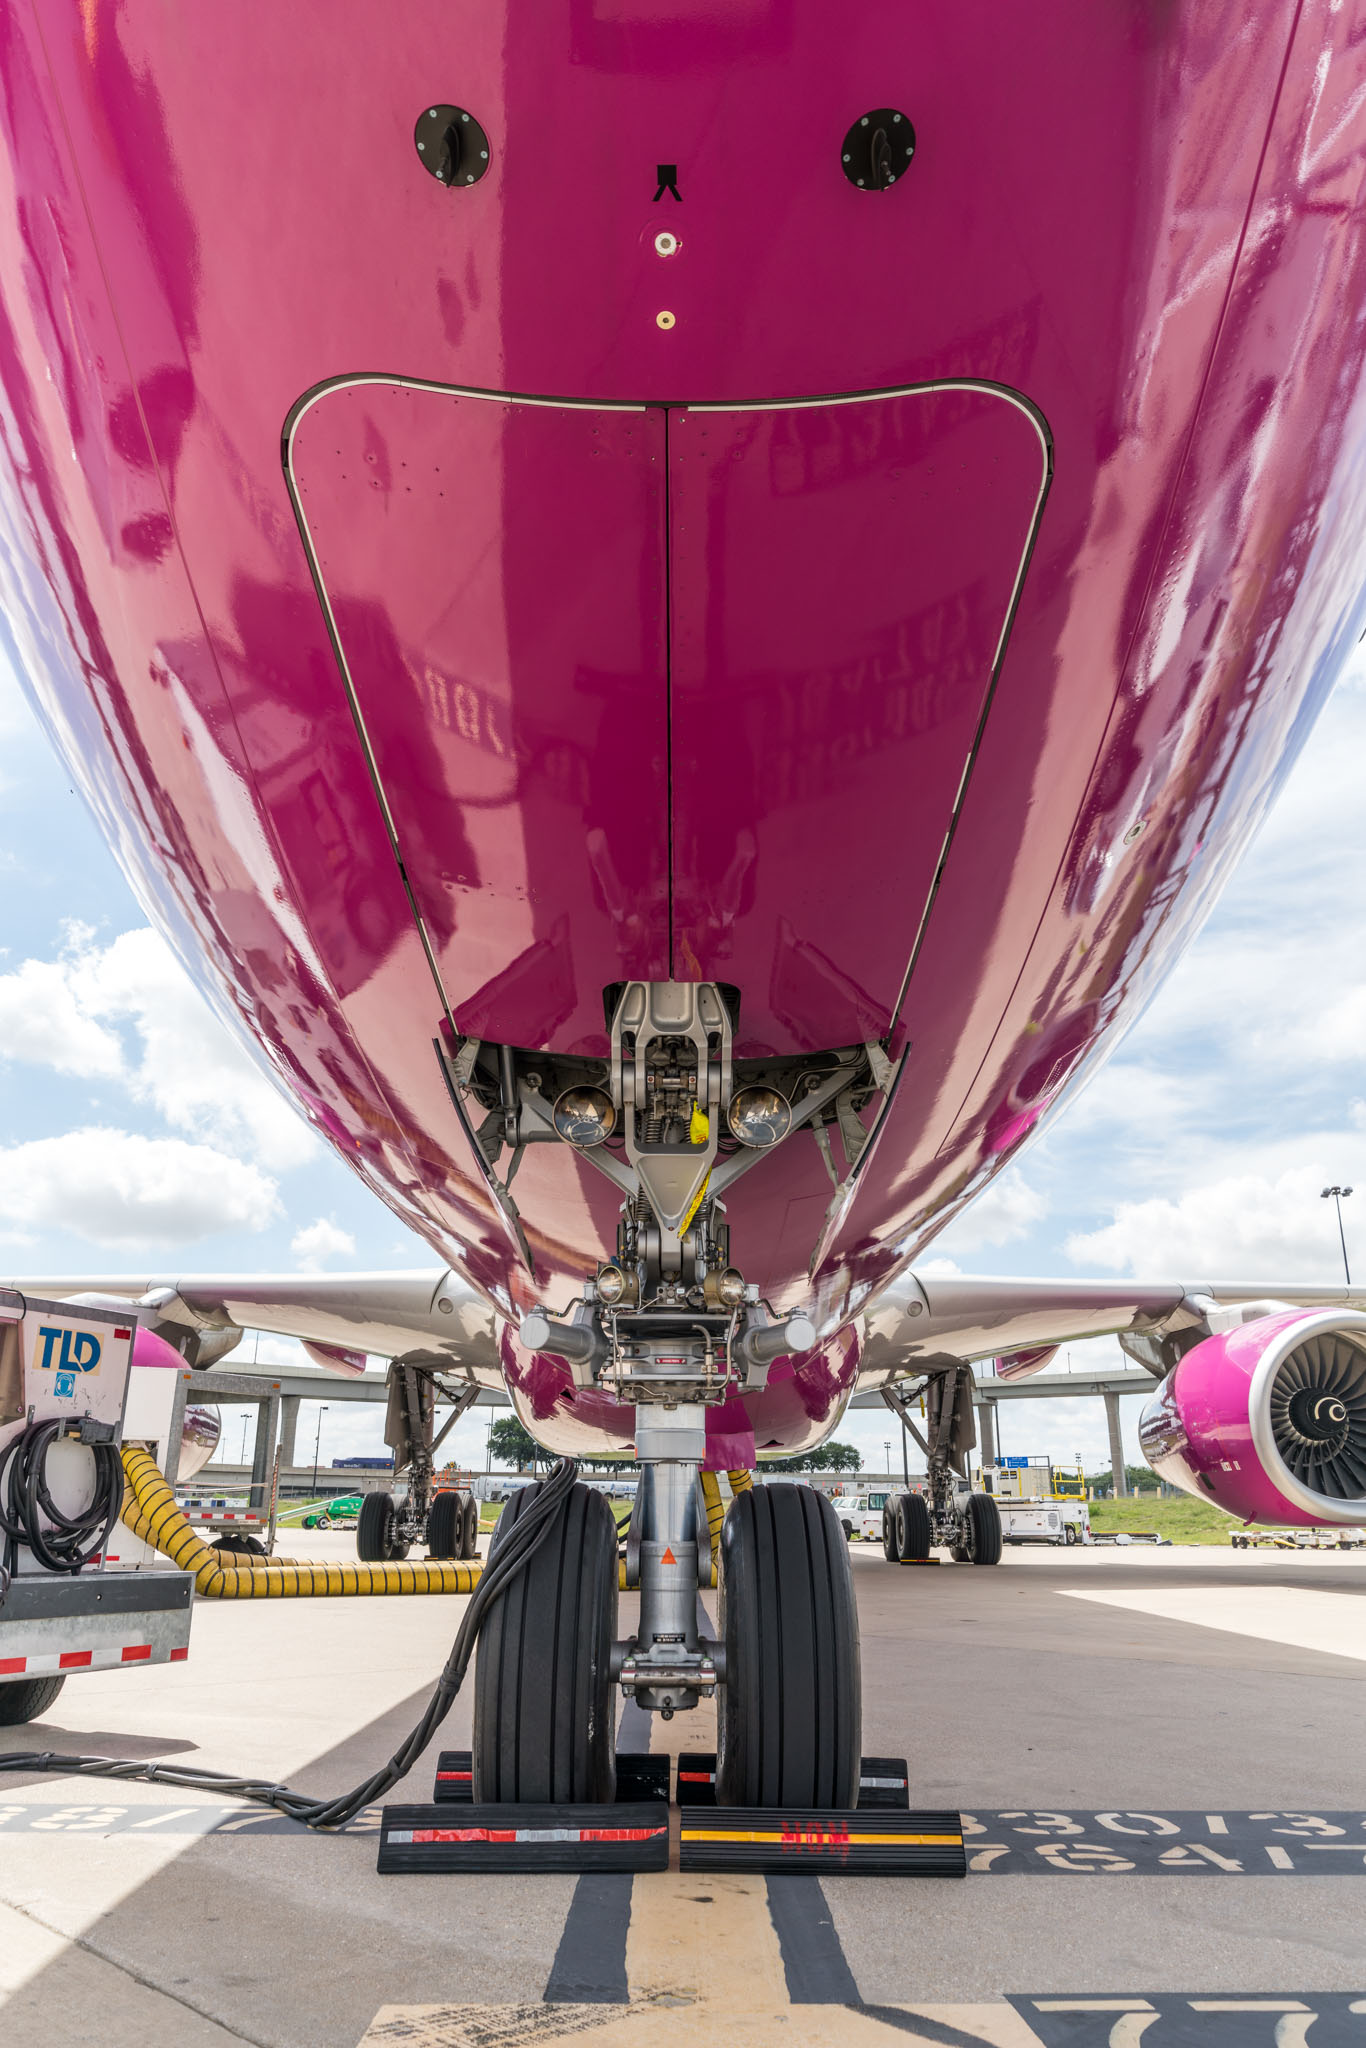 the front of a pink airplane